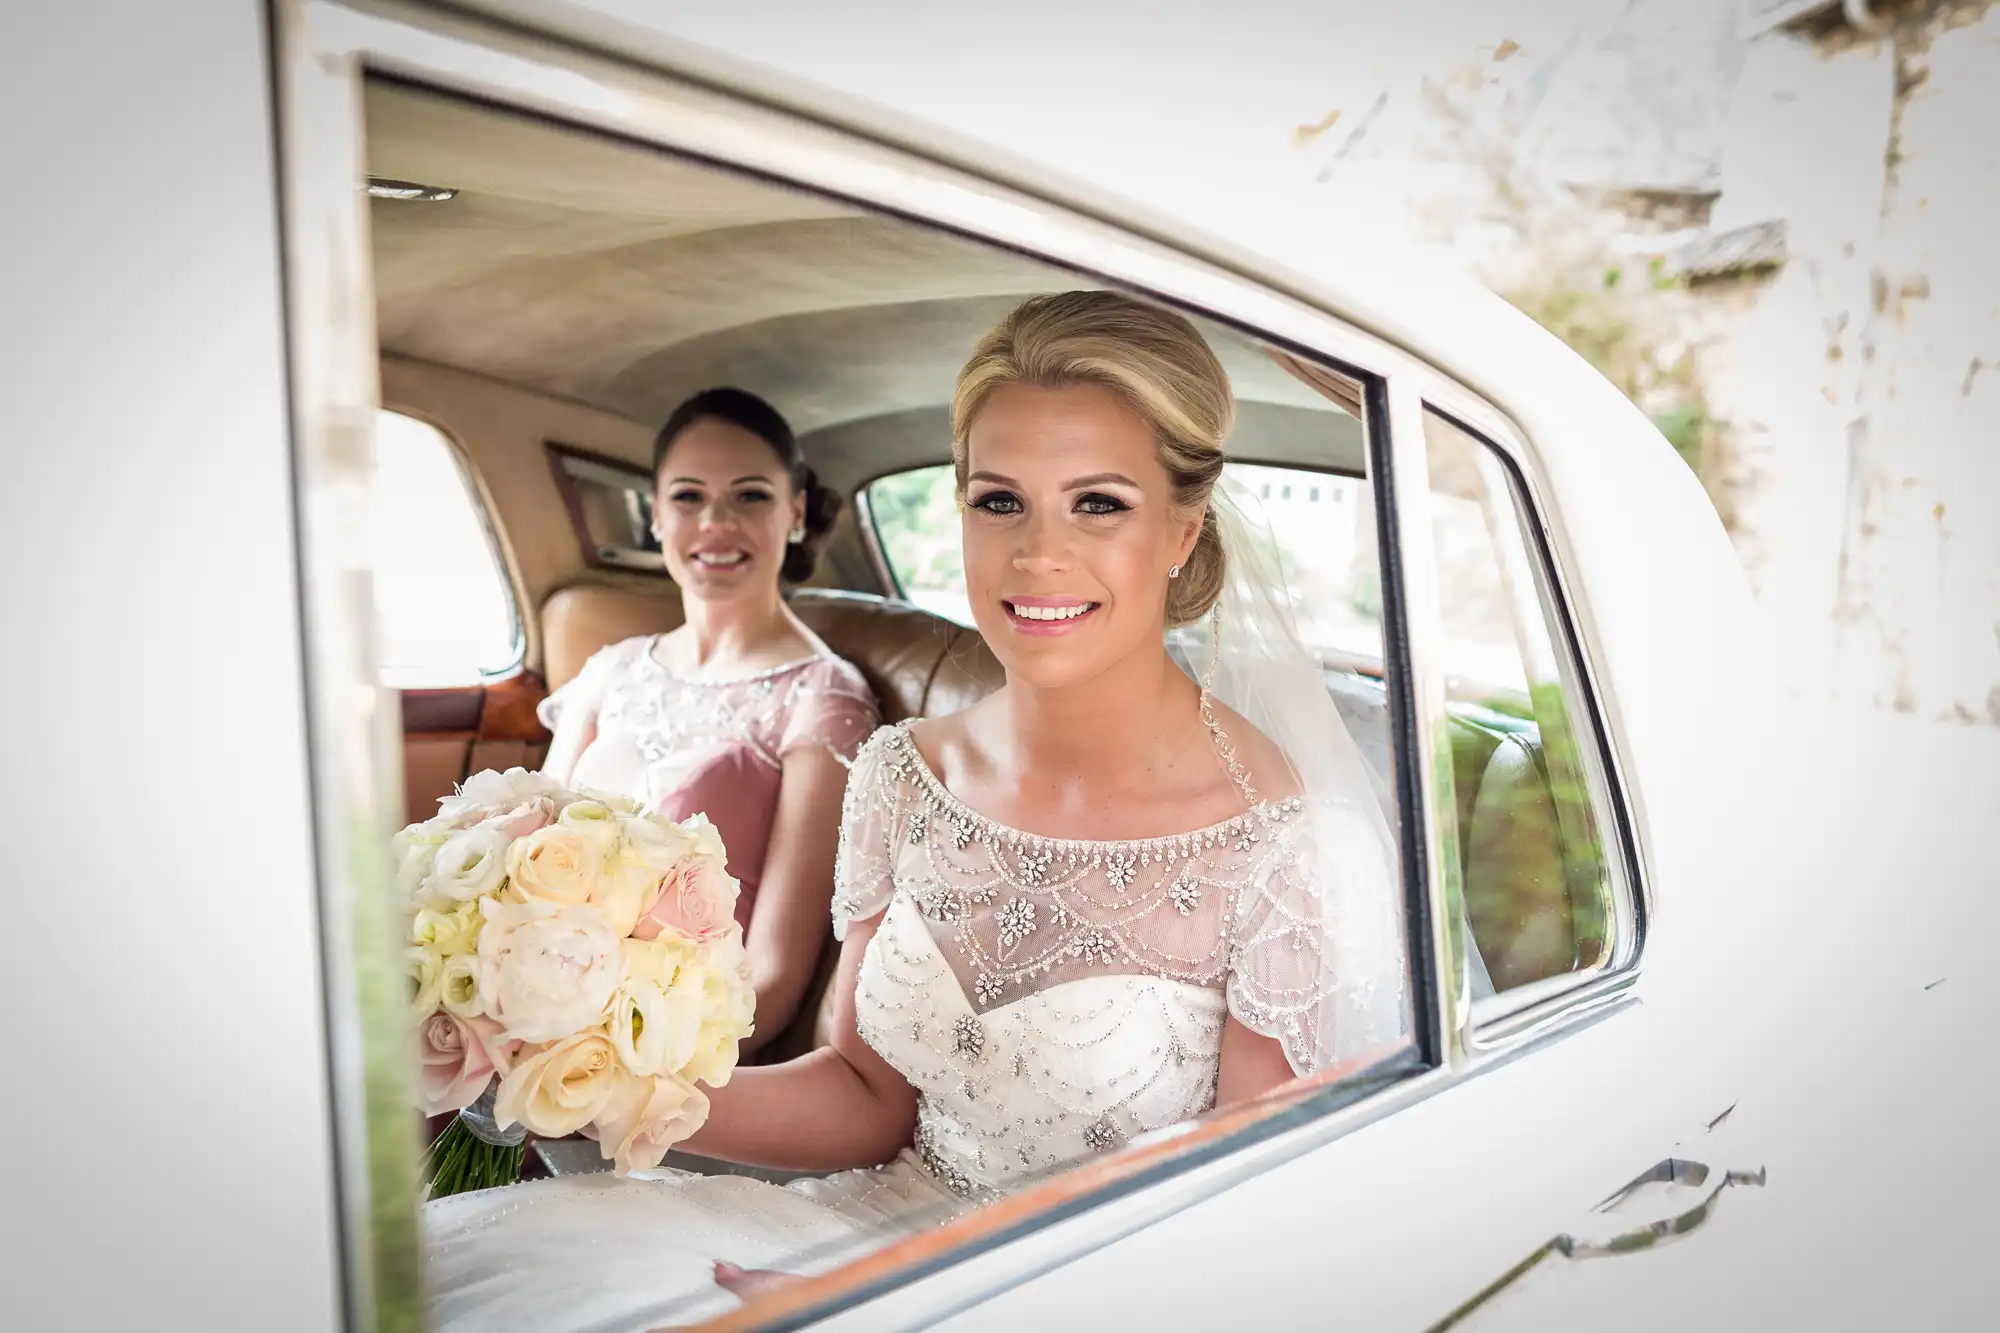 A bride holding a bouquet of flowers and her bridesmaid sit inside a car. The bride is smiling at the camera.